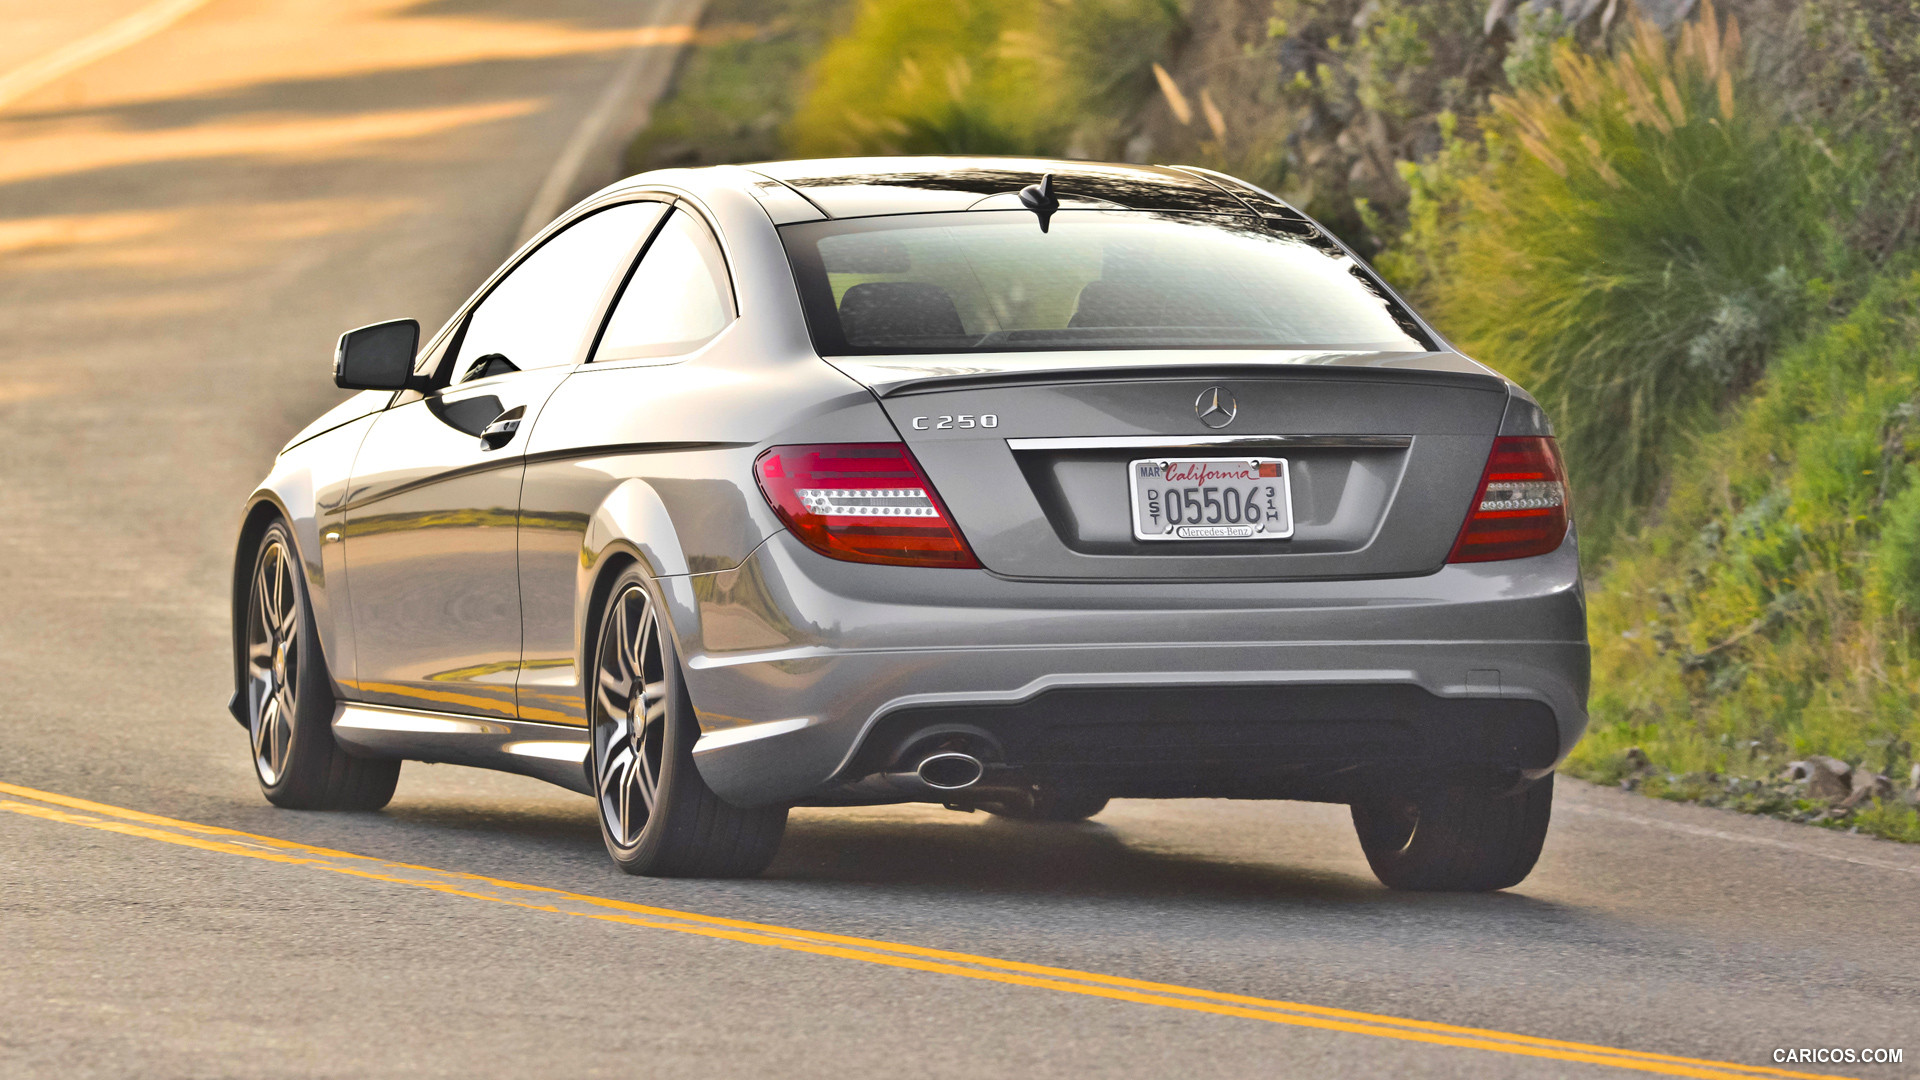 Mercedes-Benz C250 Coupe (2013)  - Rear, #48 of 86